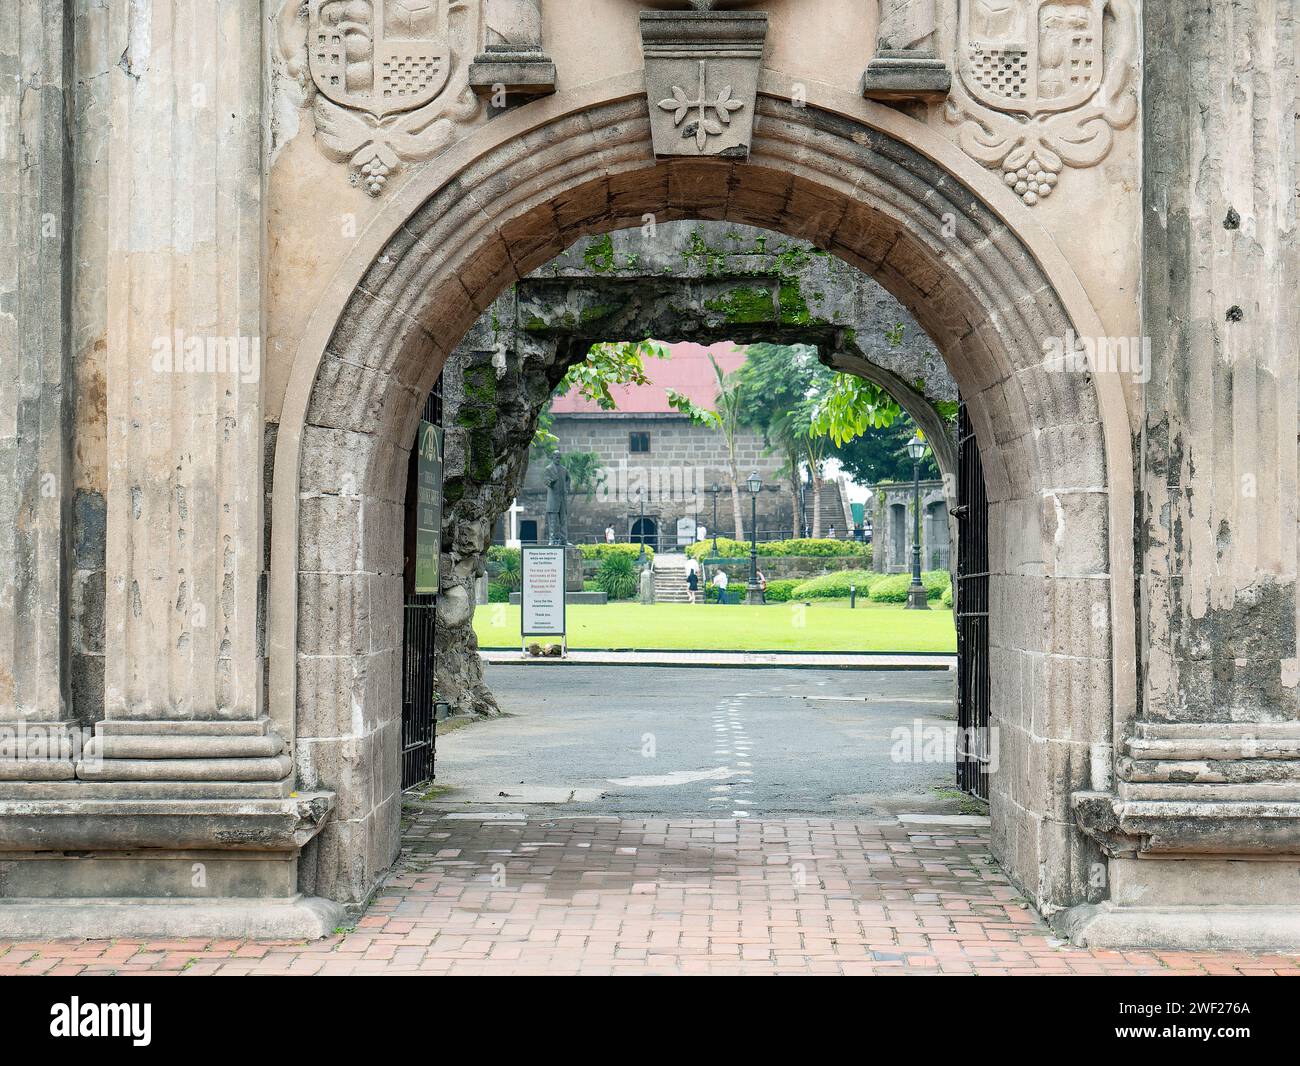 The main gate of Fort Santiago at Intramuros, Manila, Philippines, the Spanish fort built in 1571 by the Spanish. Stock Photo